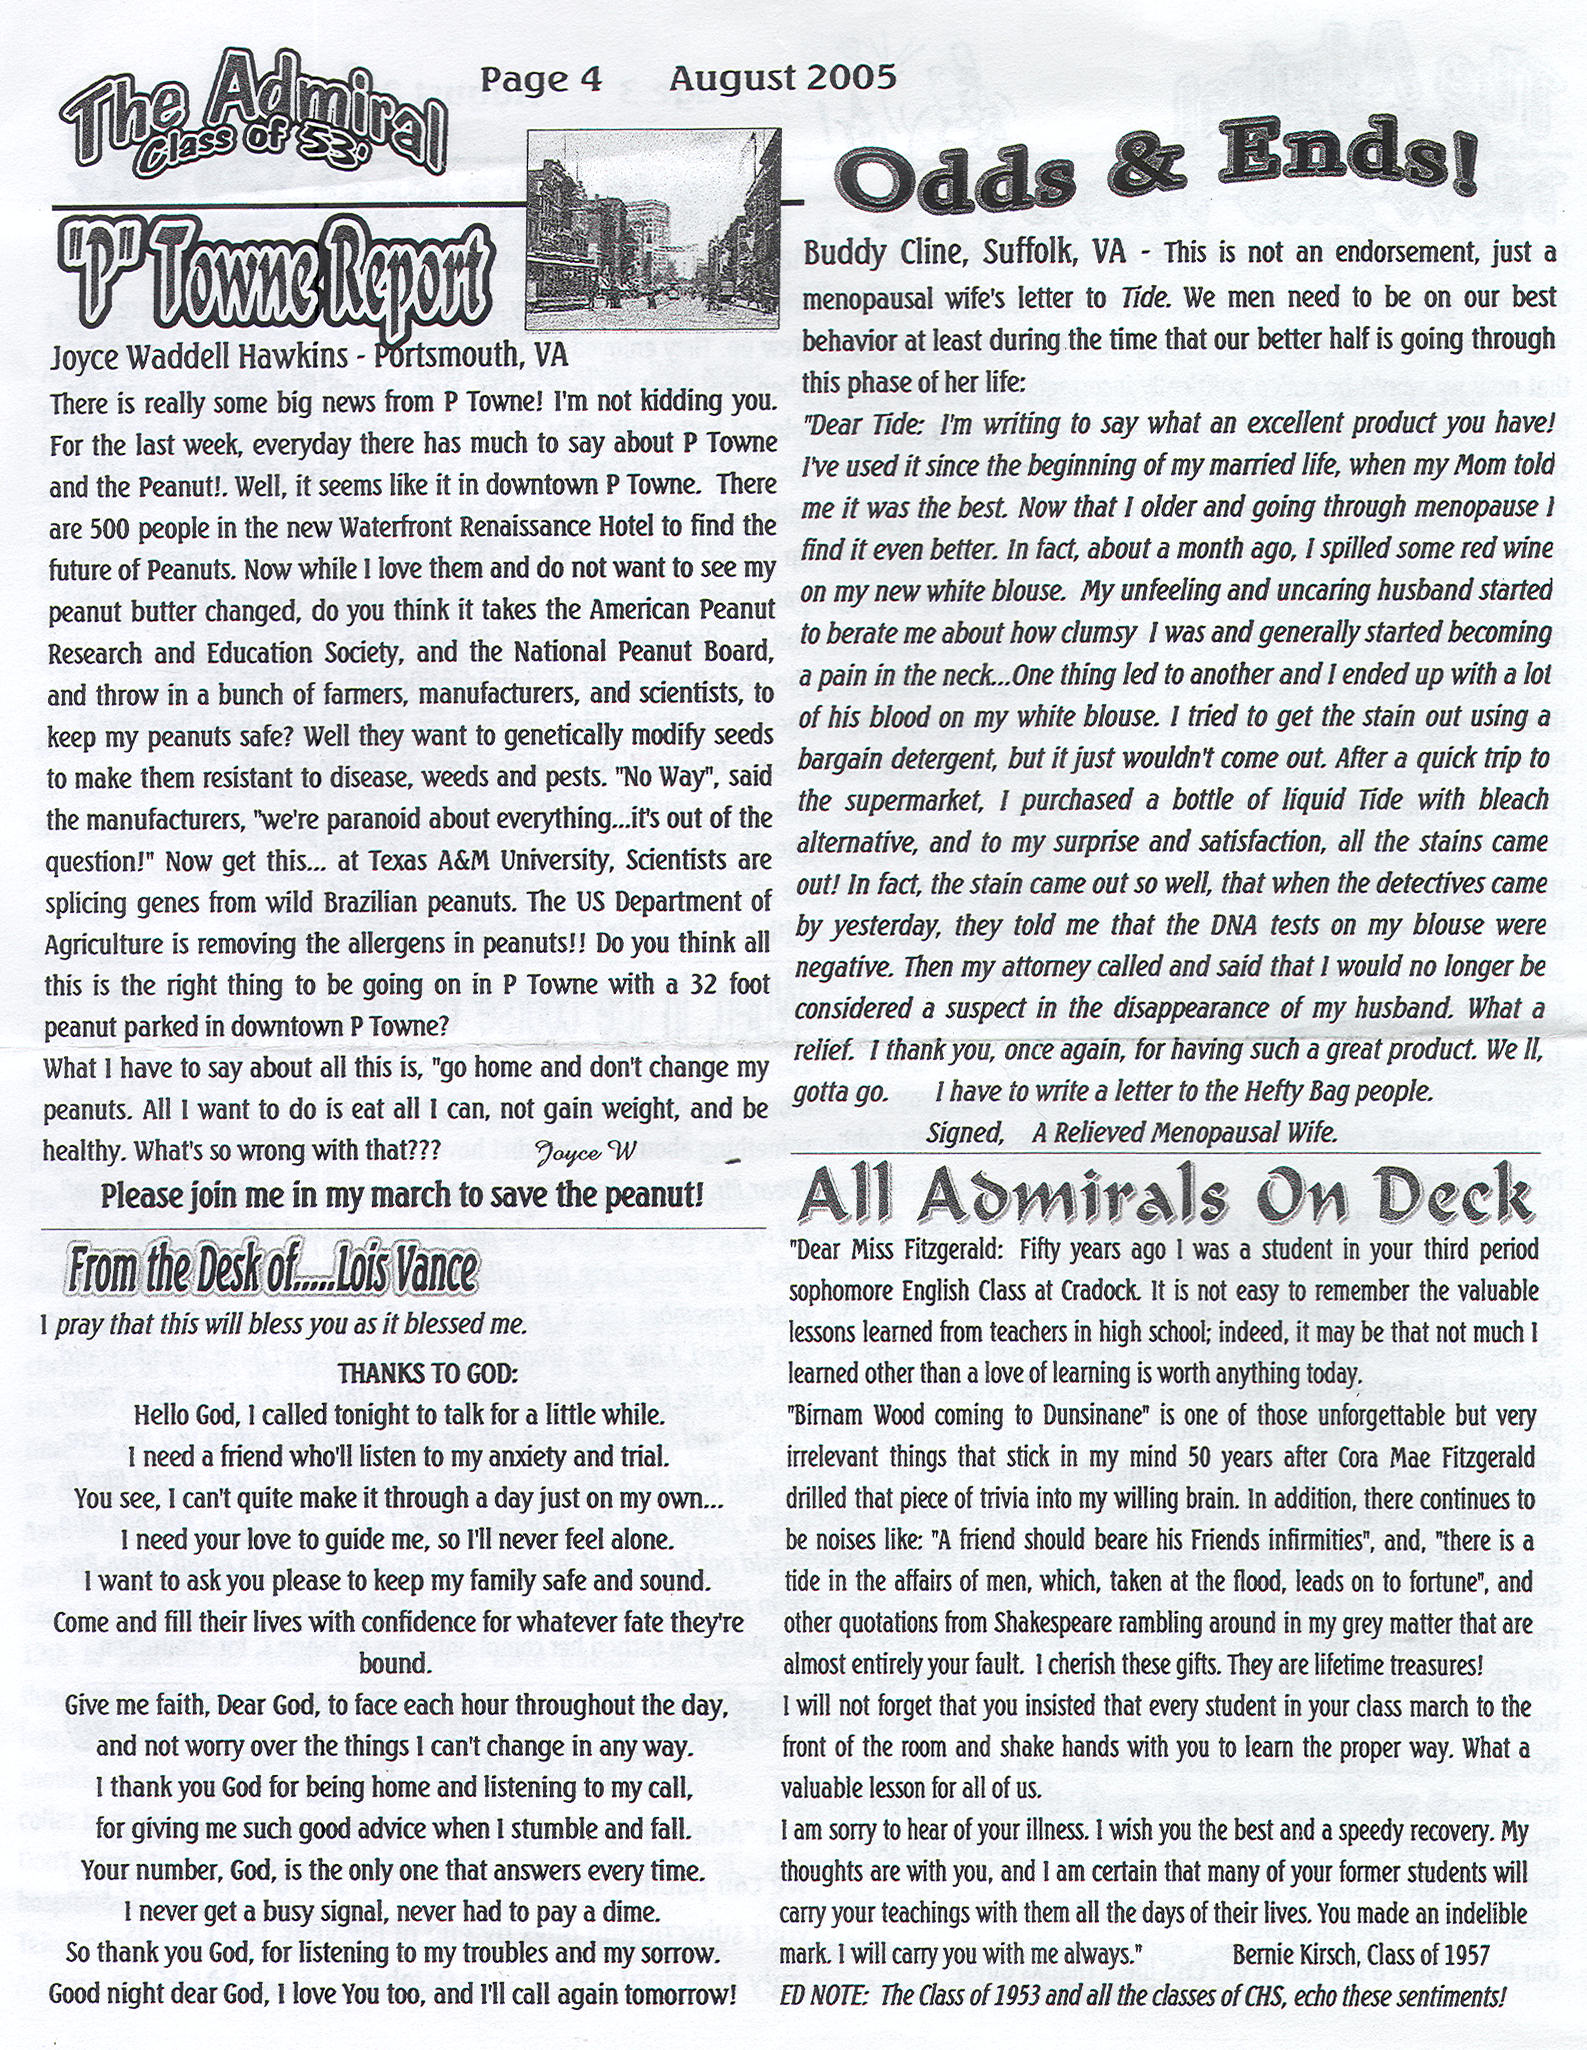 The Admiral - August 2005 - pg. 4